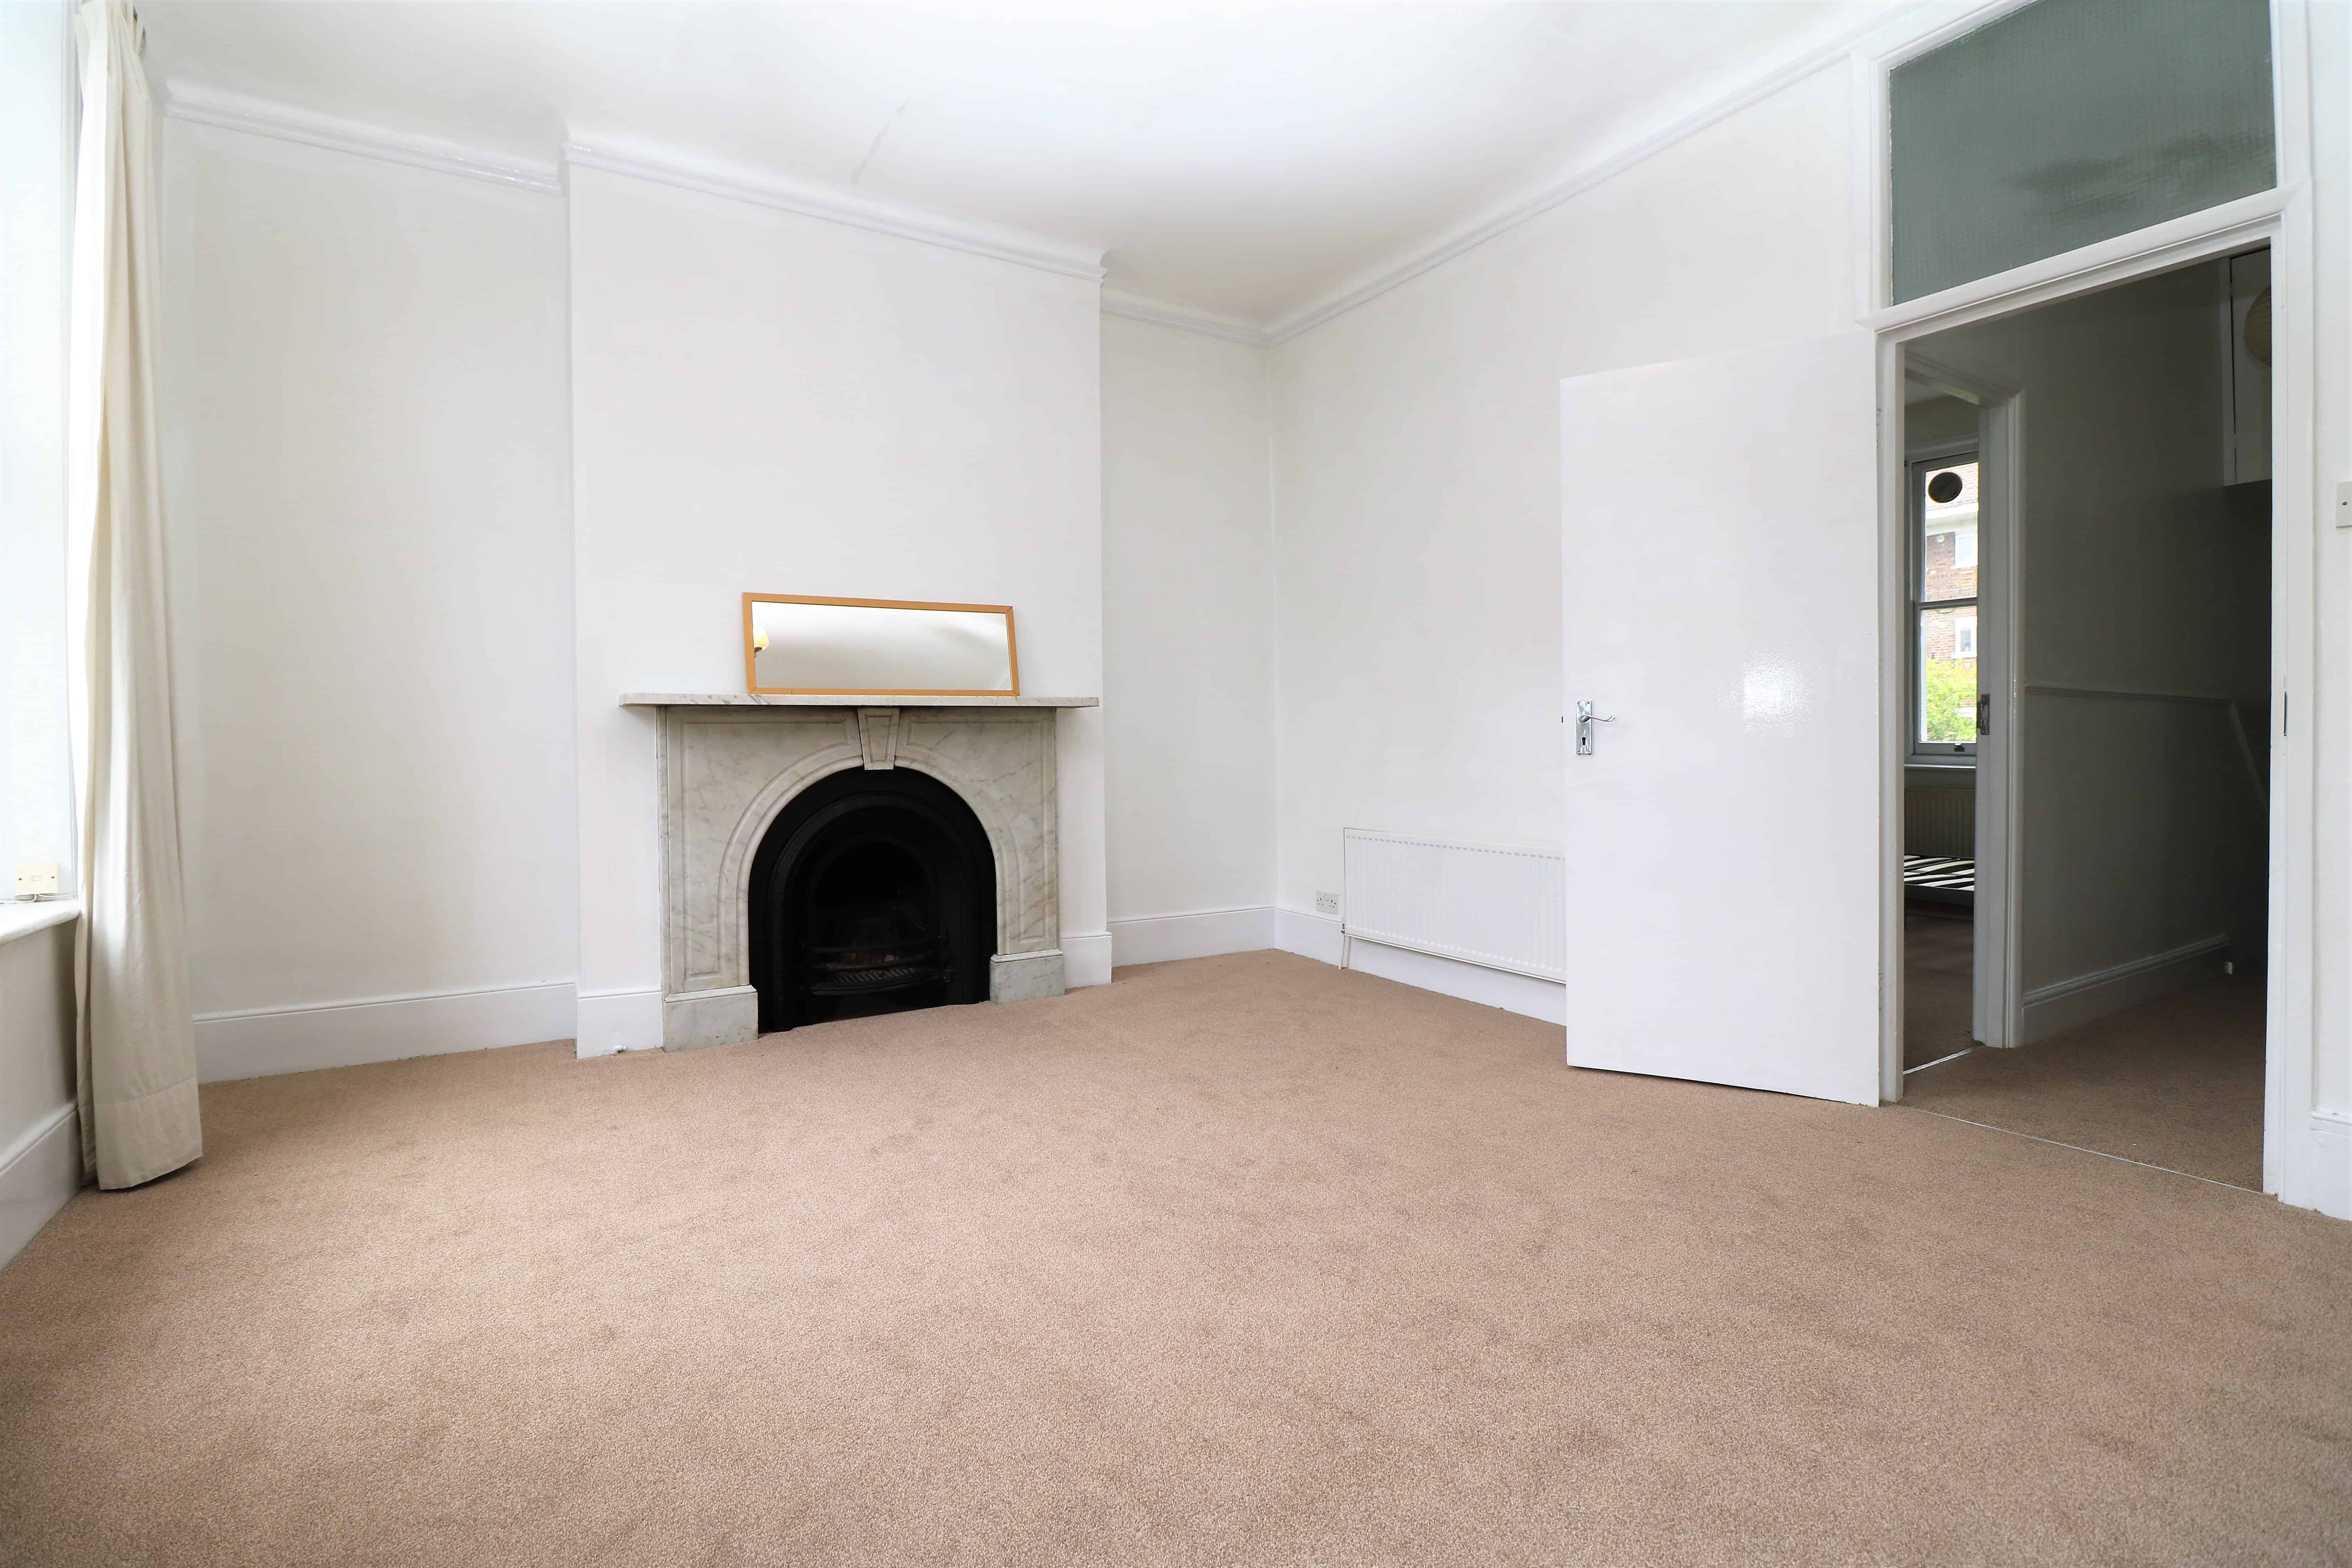 Repainted, first floor one double bedroom flat in Finsbury Park, N4. Quiet street close to station and park - Must be seen